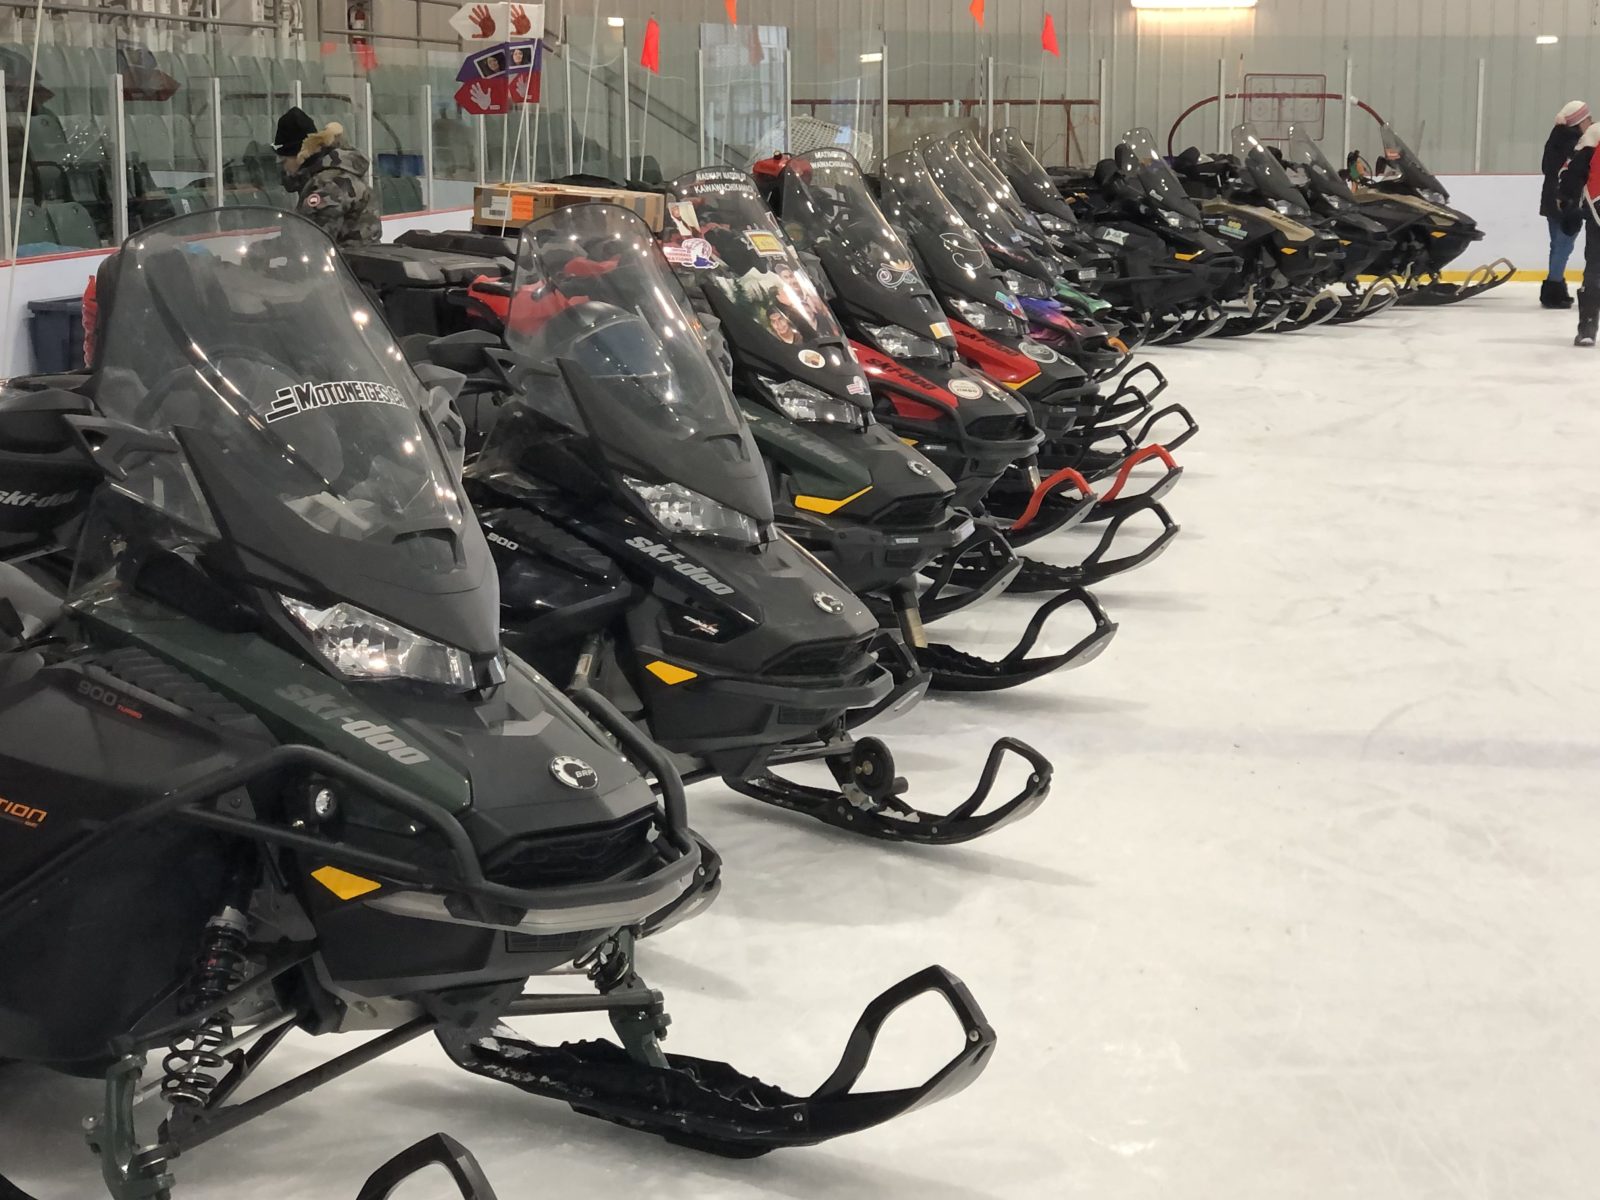 snowmobiles are parked in the local arena until the big launch of the first nations expedition